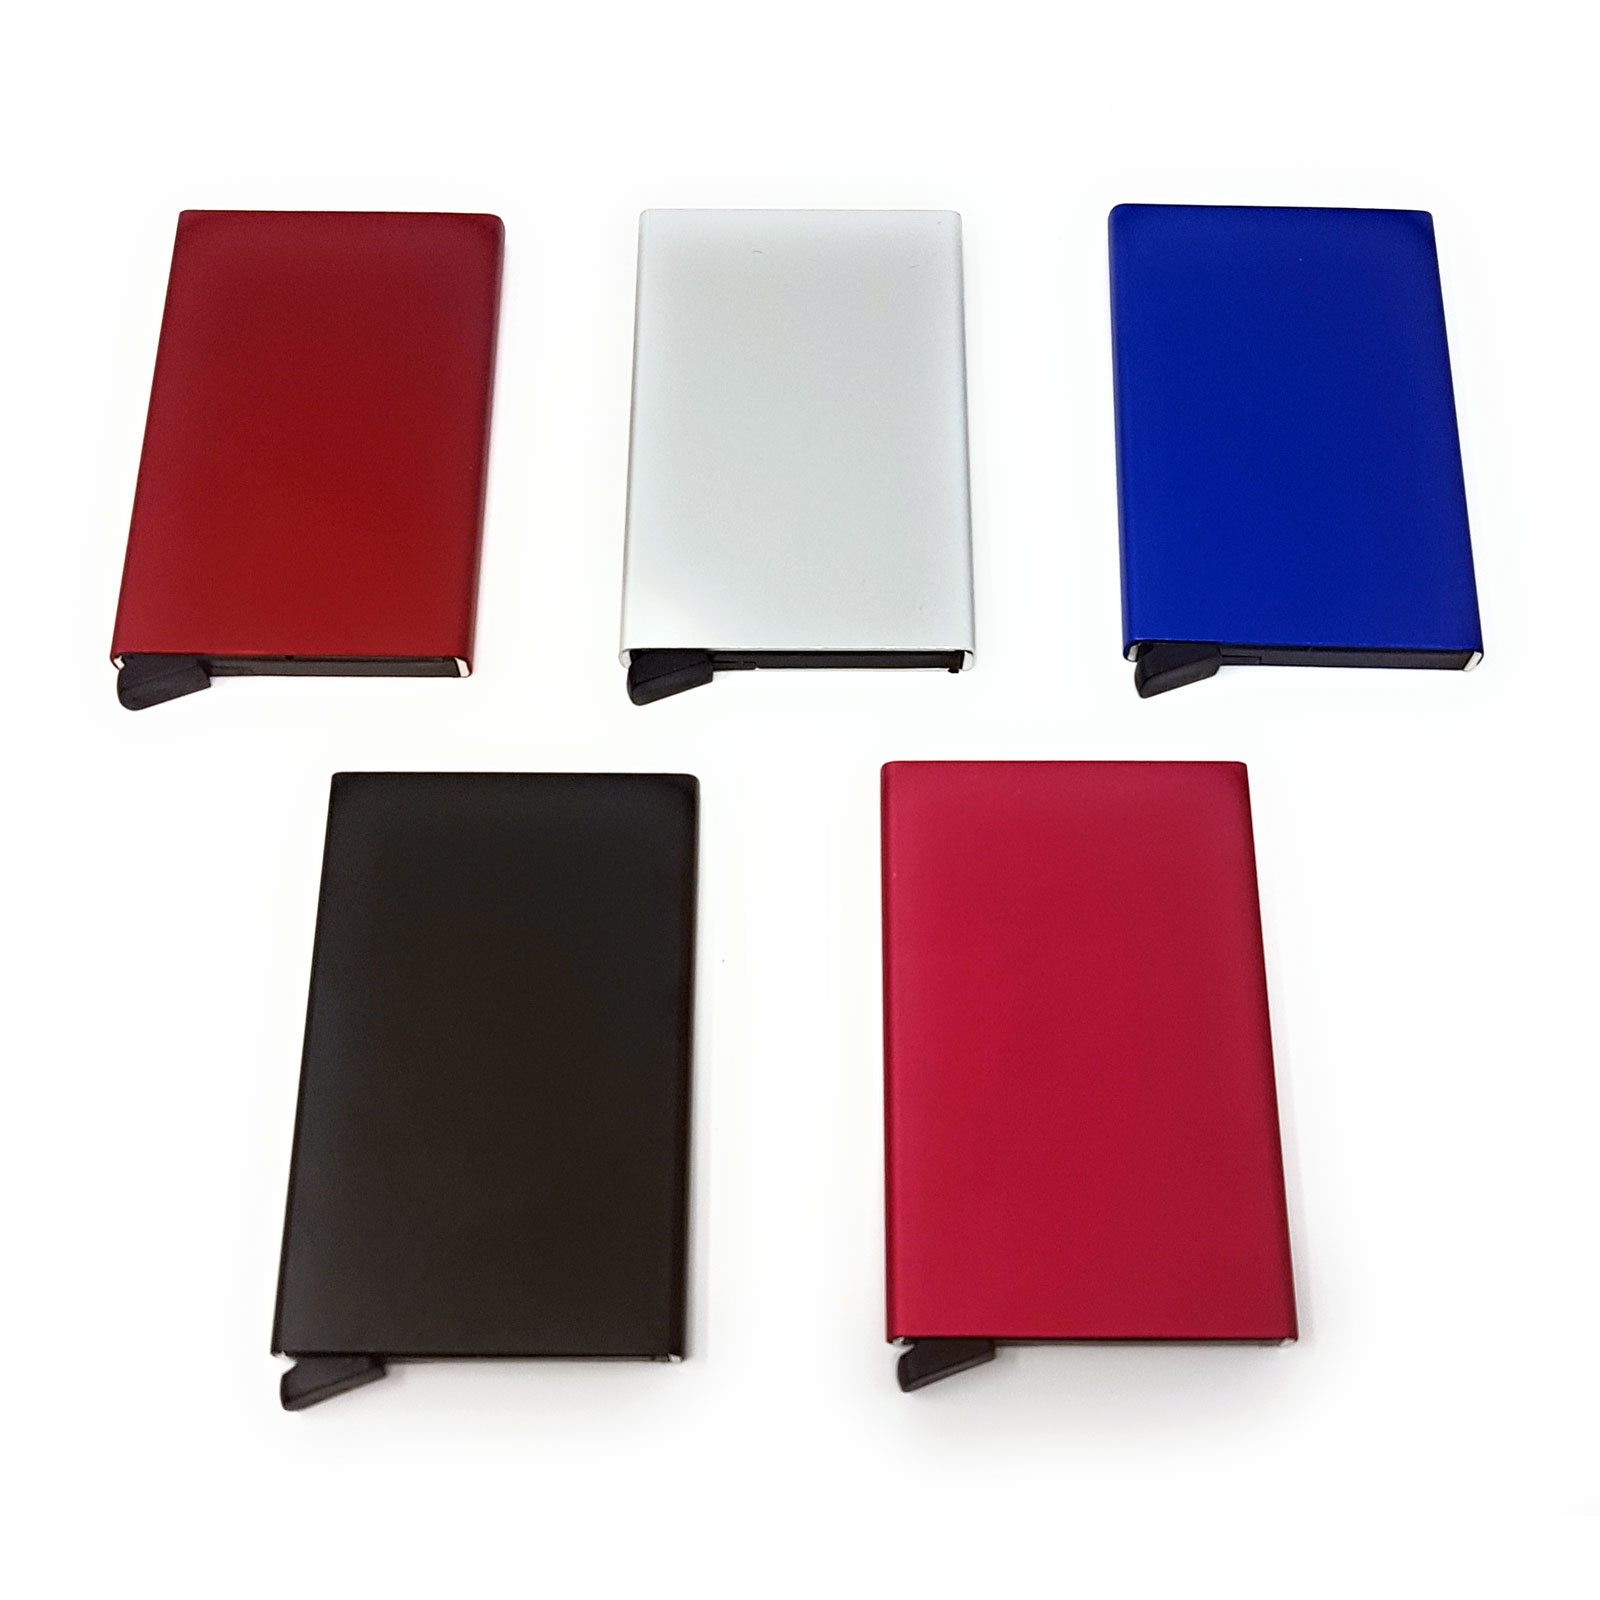 1,000 x Mixed Colour Pop Up RFID Protective Card Holder